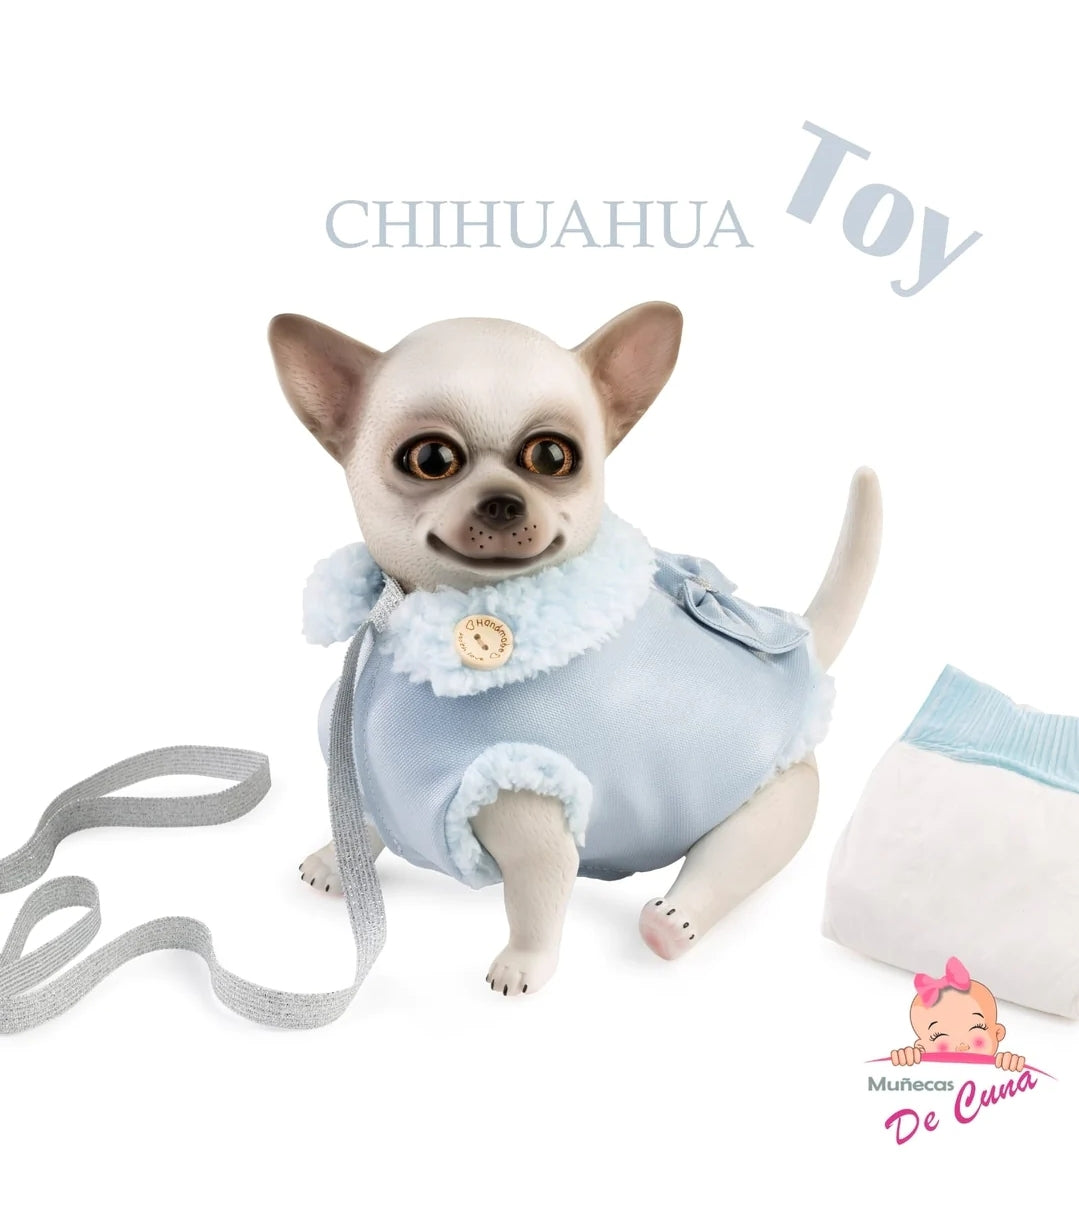 Spanish Toby Reborn Chihuahua Dog 020209 - IN STOCK NOW